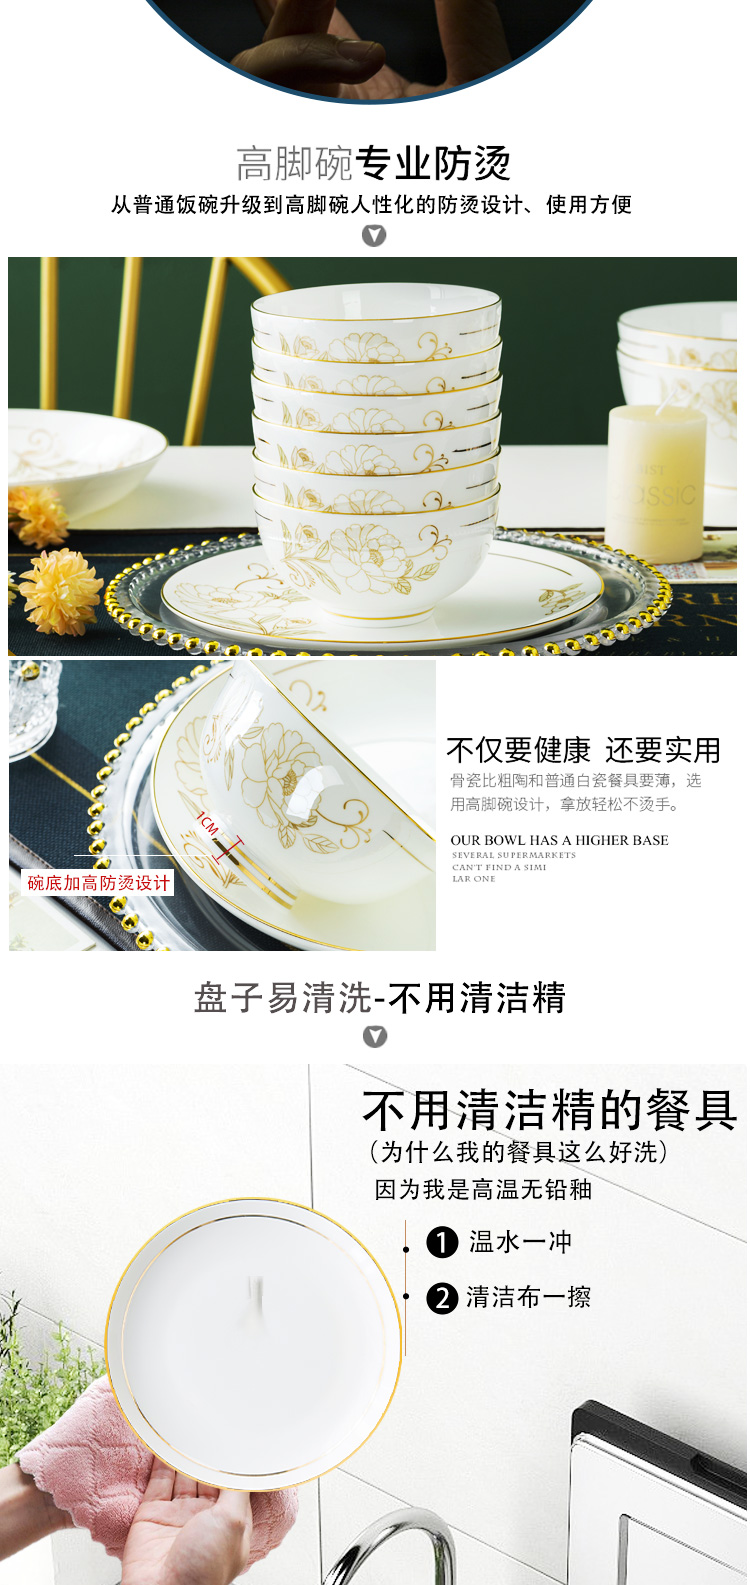 Dishes suit household light key-2 luxury Nordic high - grade ipads China jingdezhen ceramic tableware up phnom penh version into a gift box